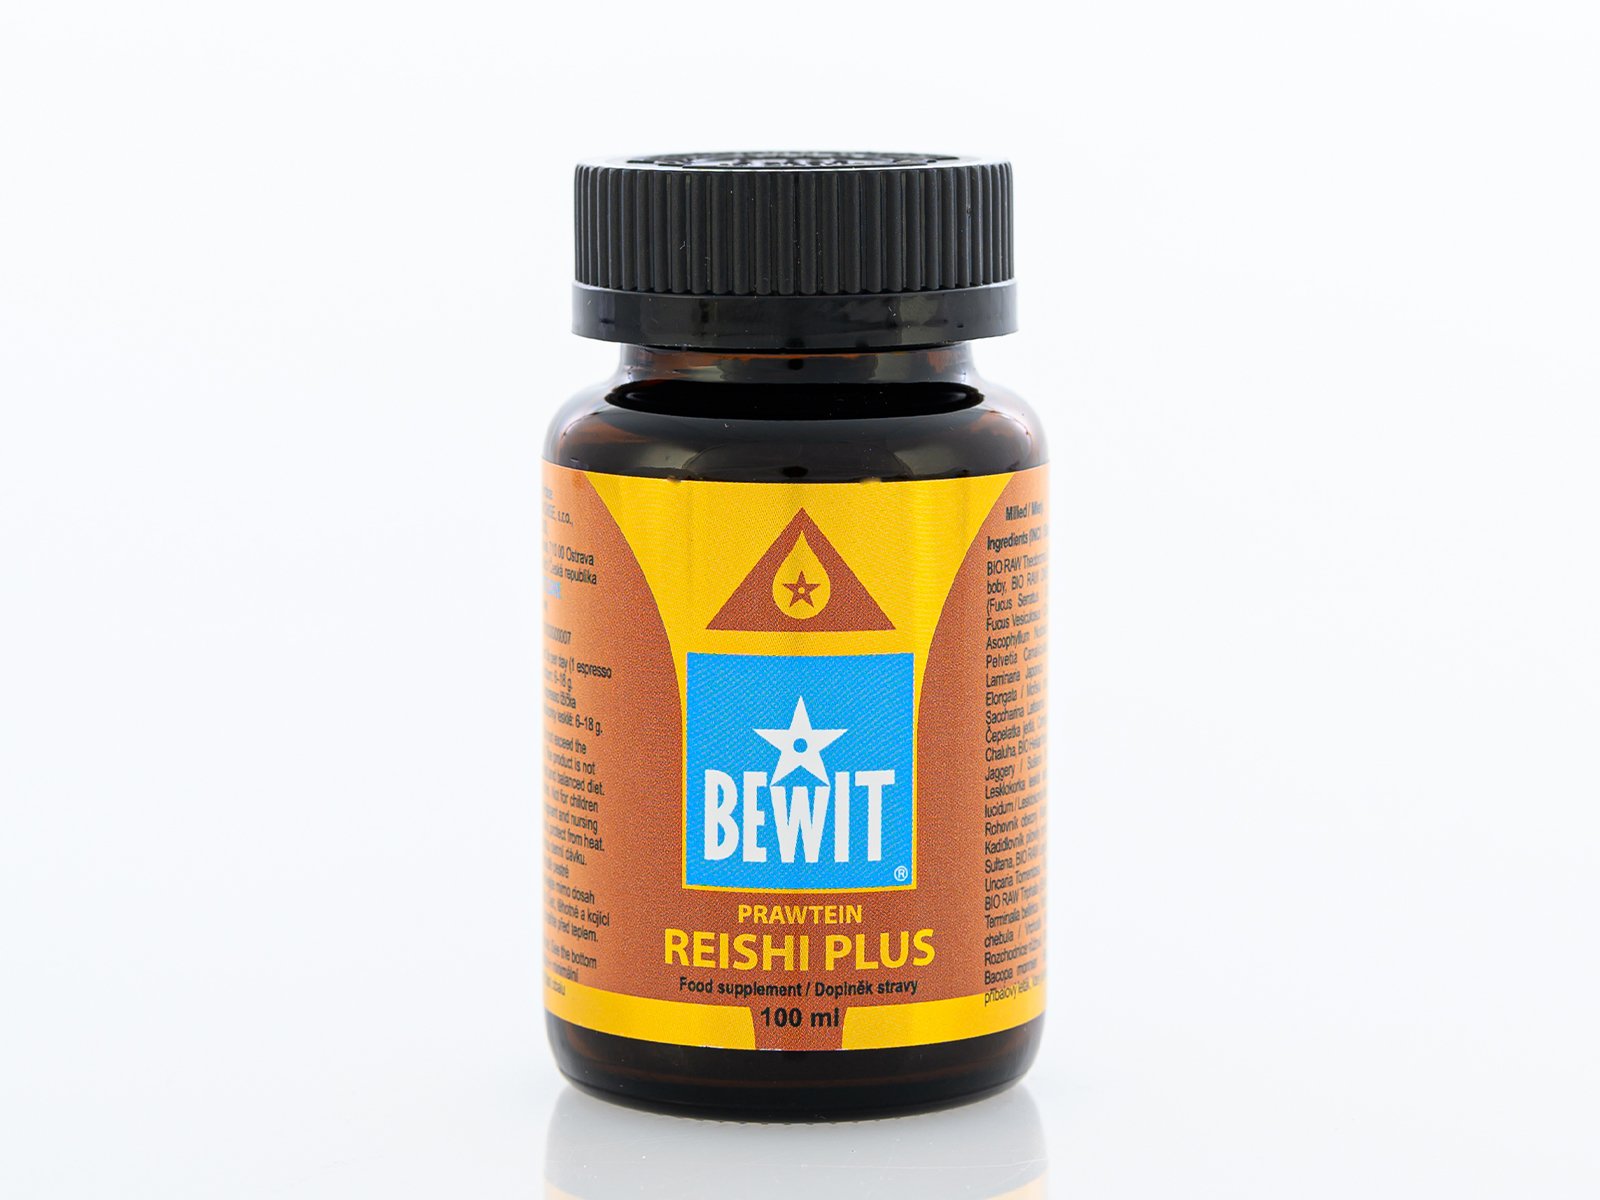 BEWIT® PRAWTEIN® REISHI PLUS - A unique and powerful food supplement - 1